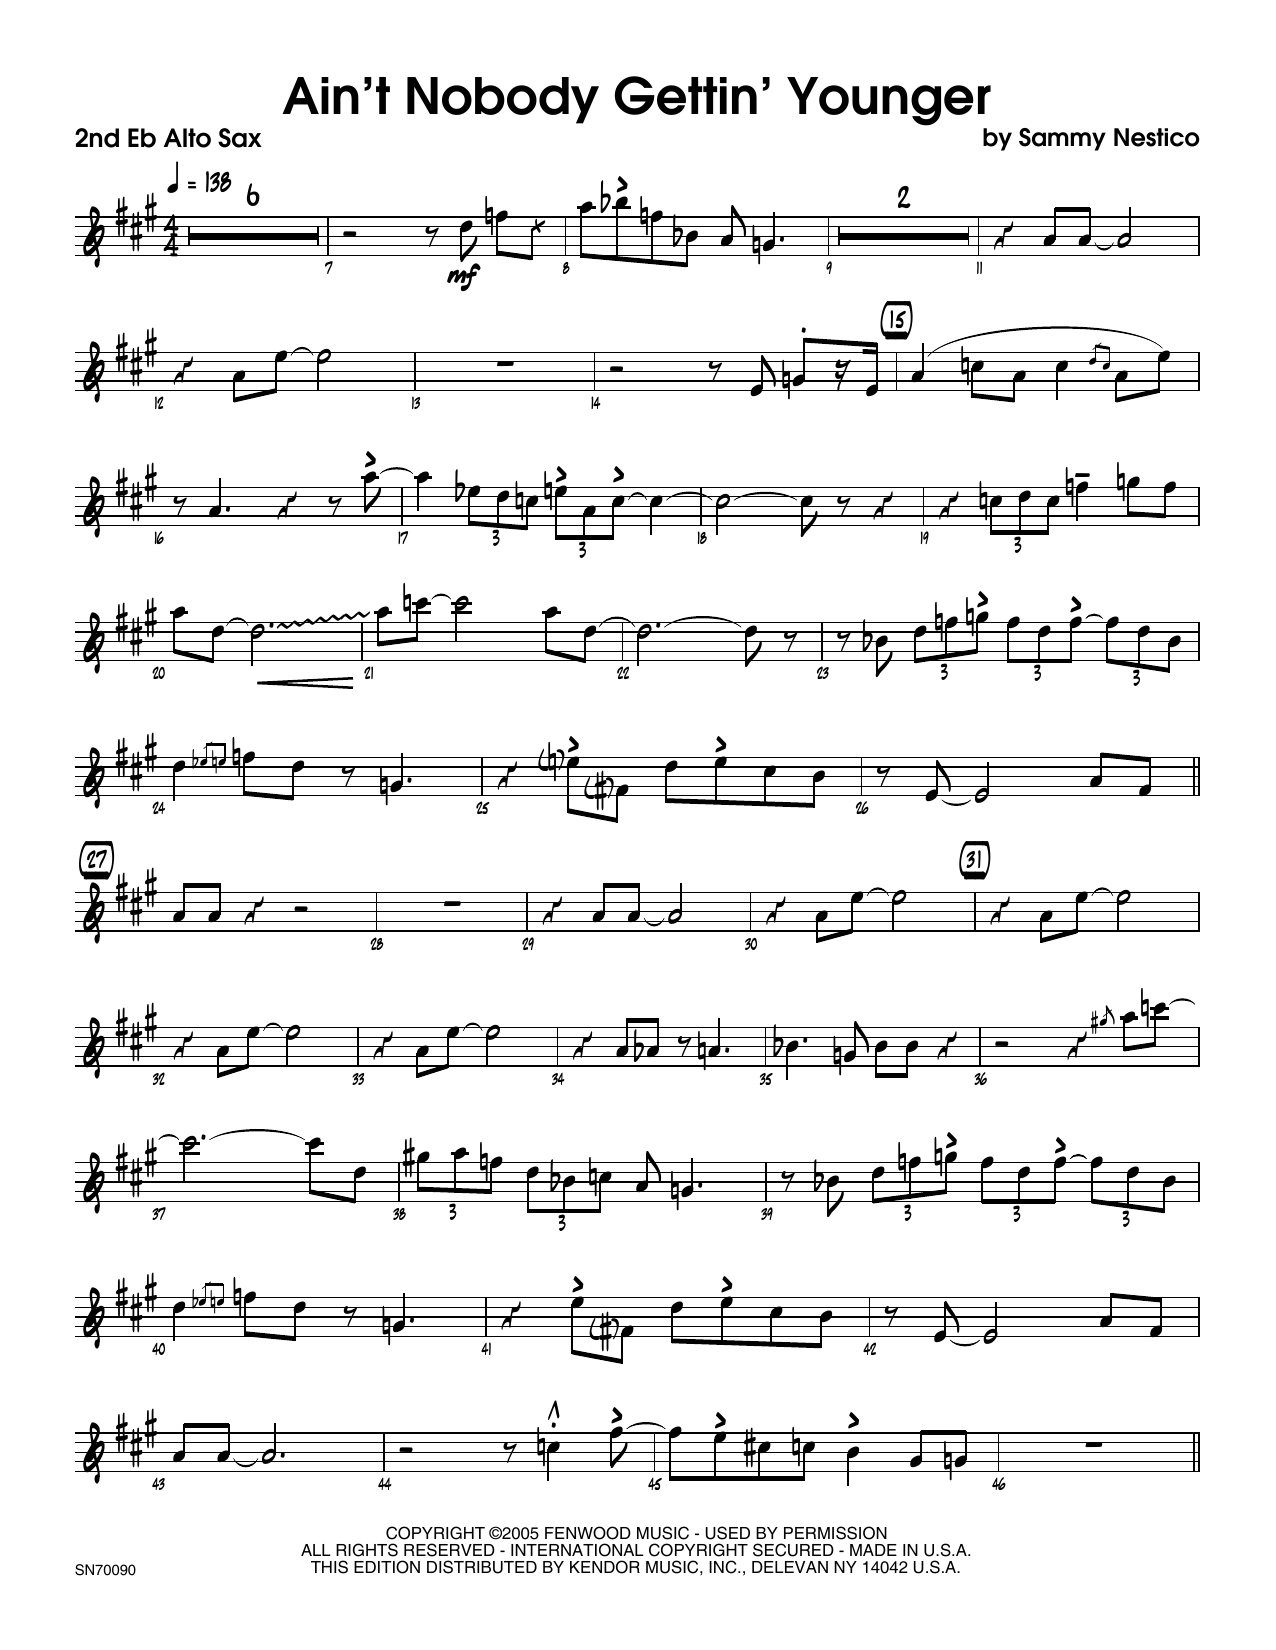 Download Sammy Nestico Ain't Nobody Gettin' Younger - 2nd Eb A Sheet Music